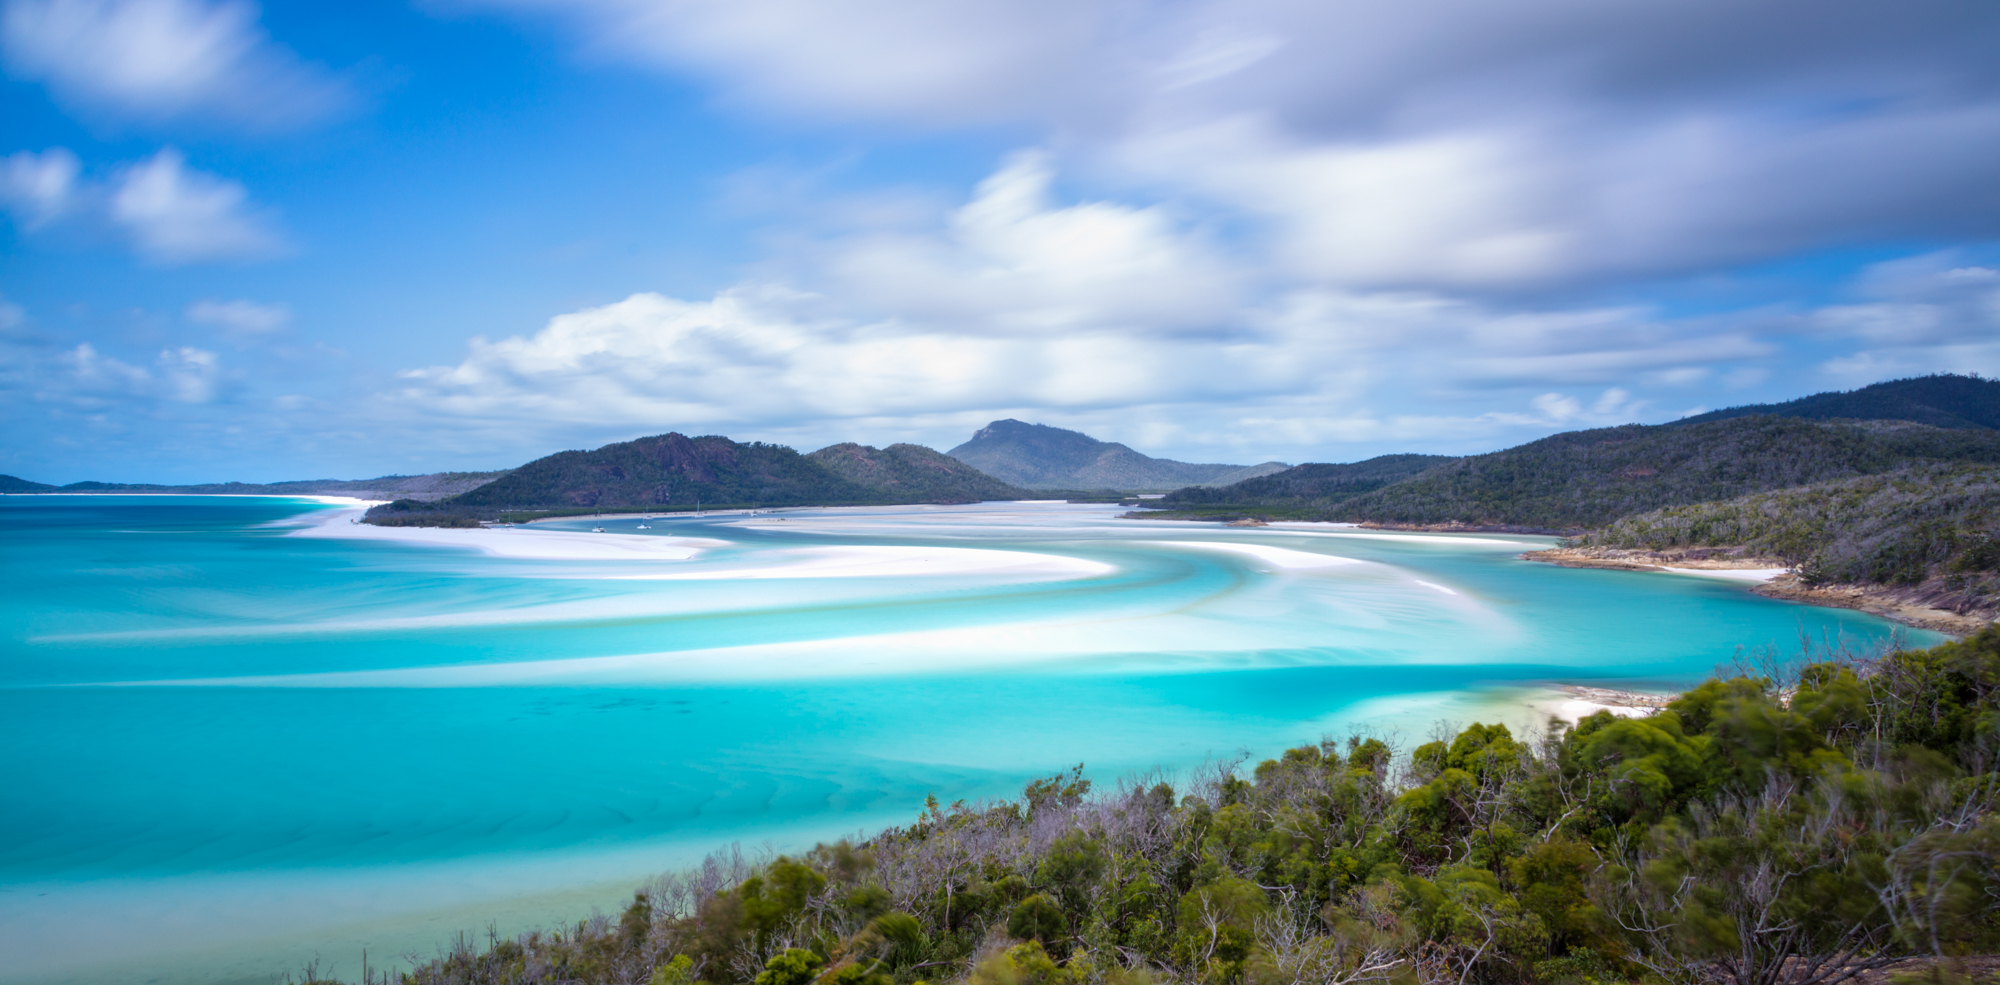 When the day resort tourists leave Whitehaven Beach - you will have it all to yourself. 